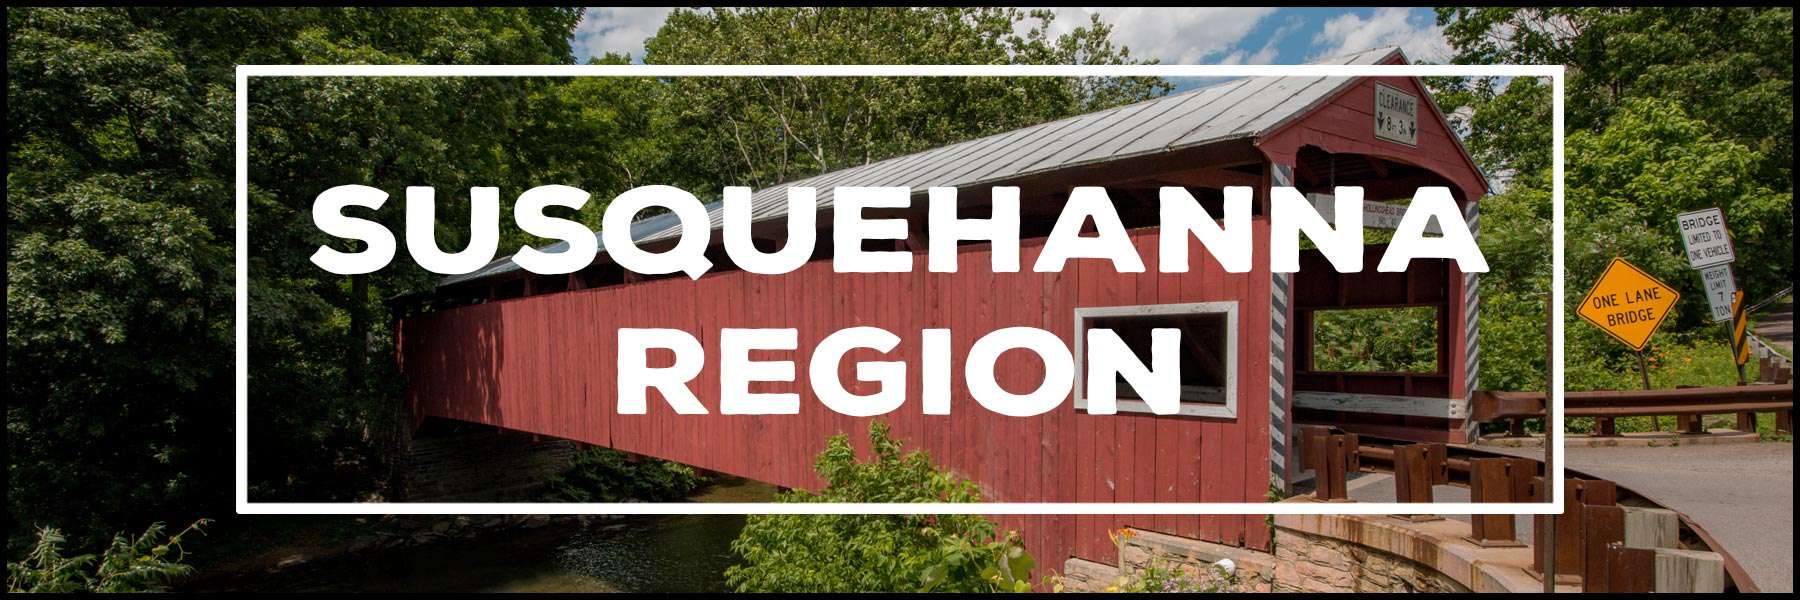 The best things to do in the Susquehanna Region of Pennsylvania